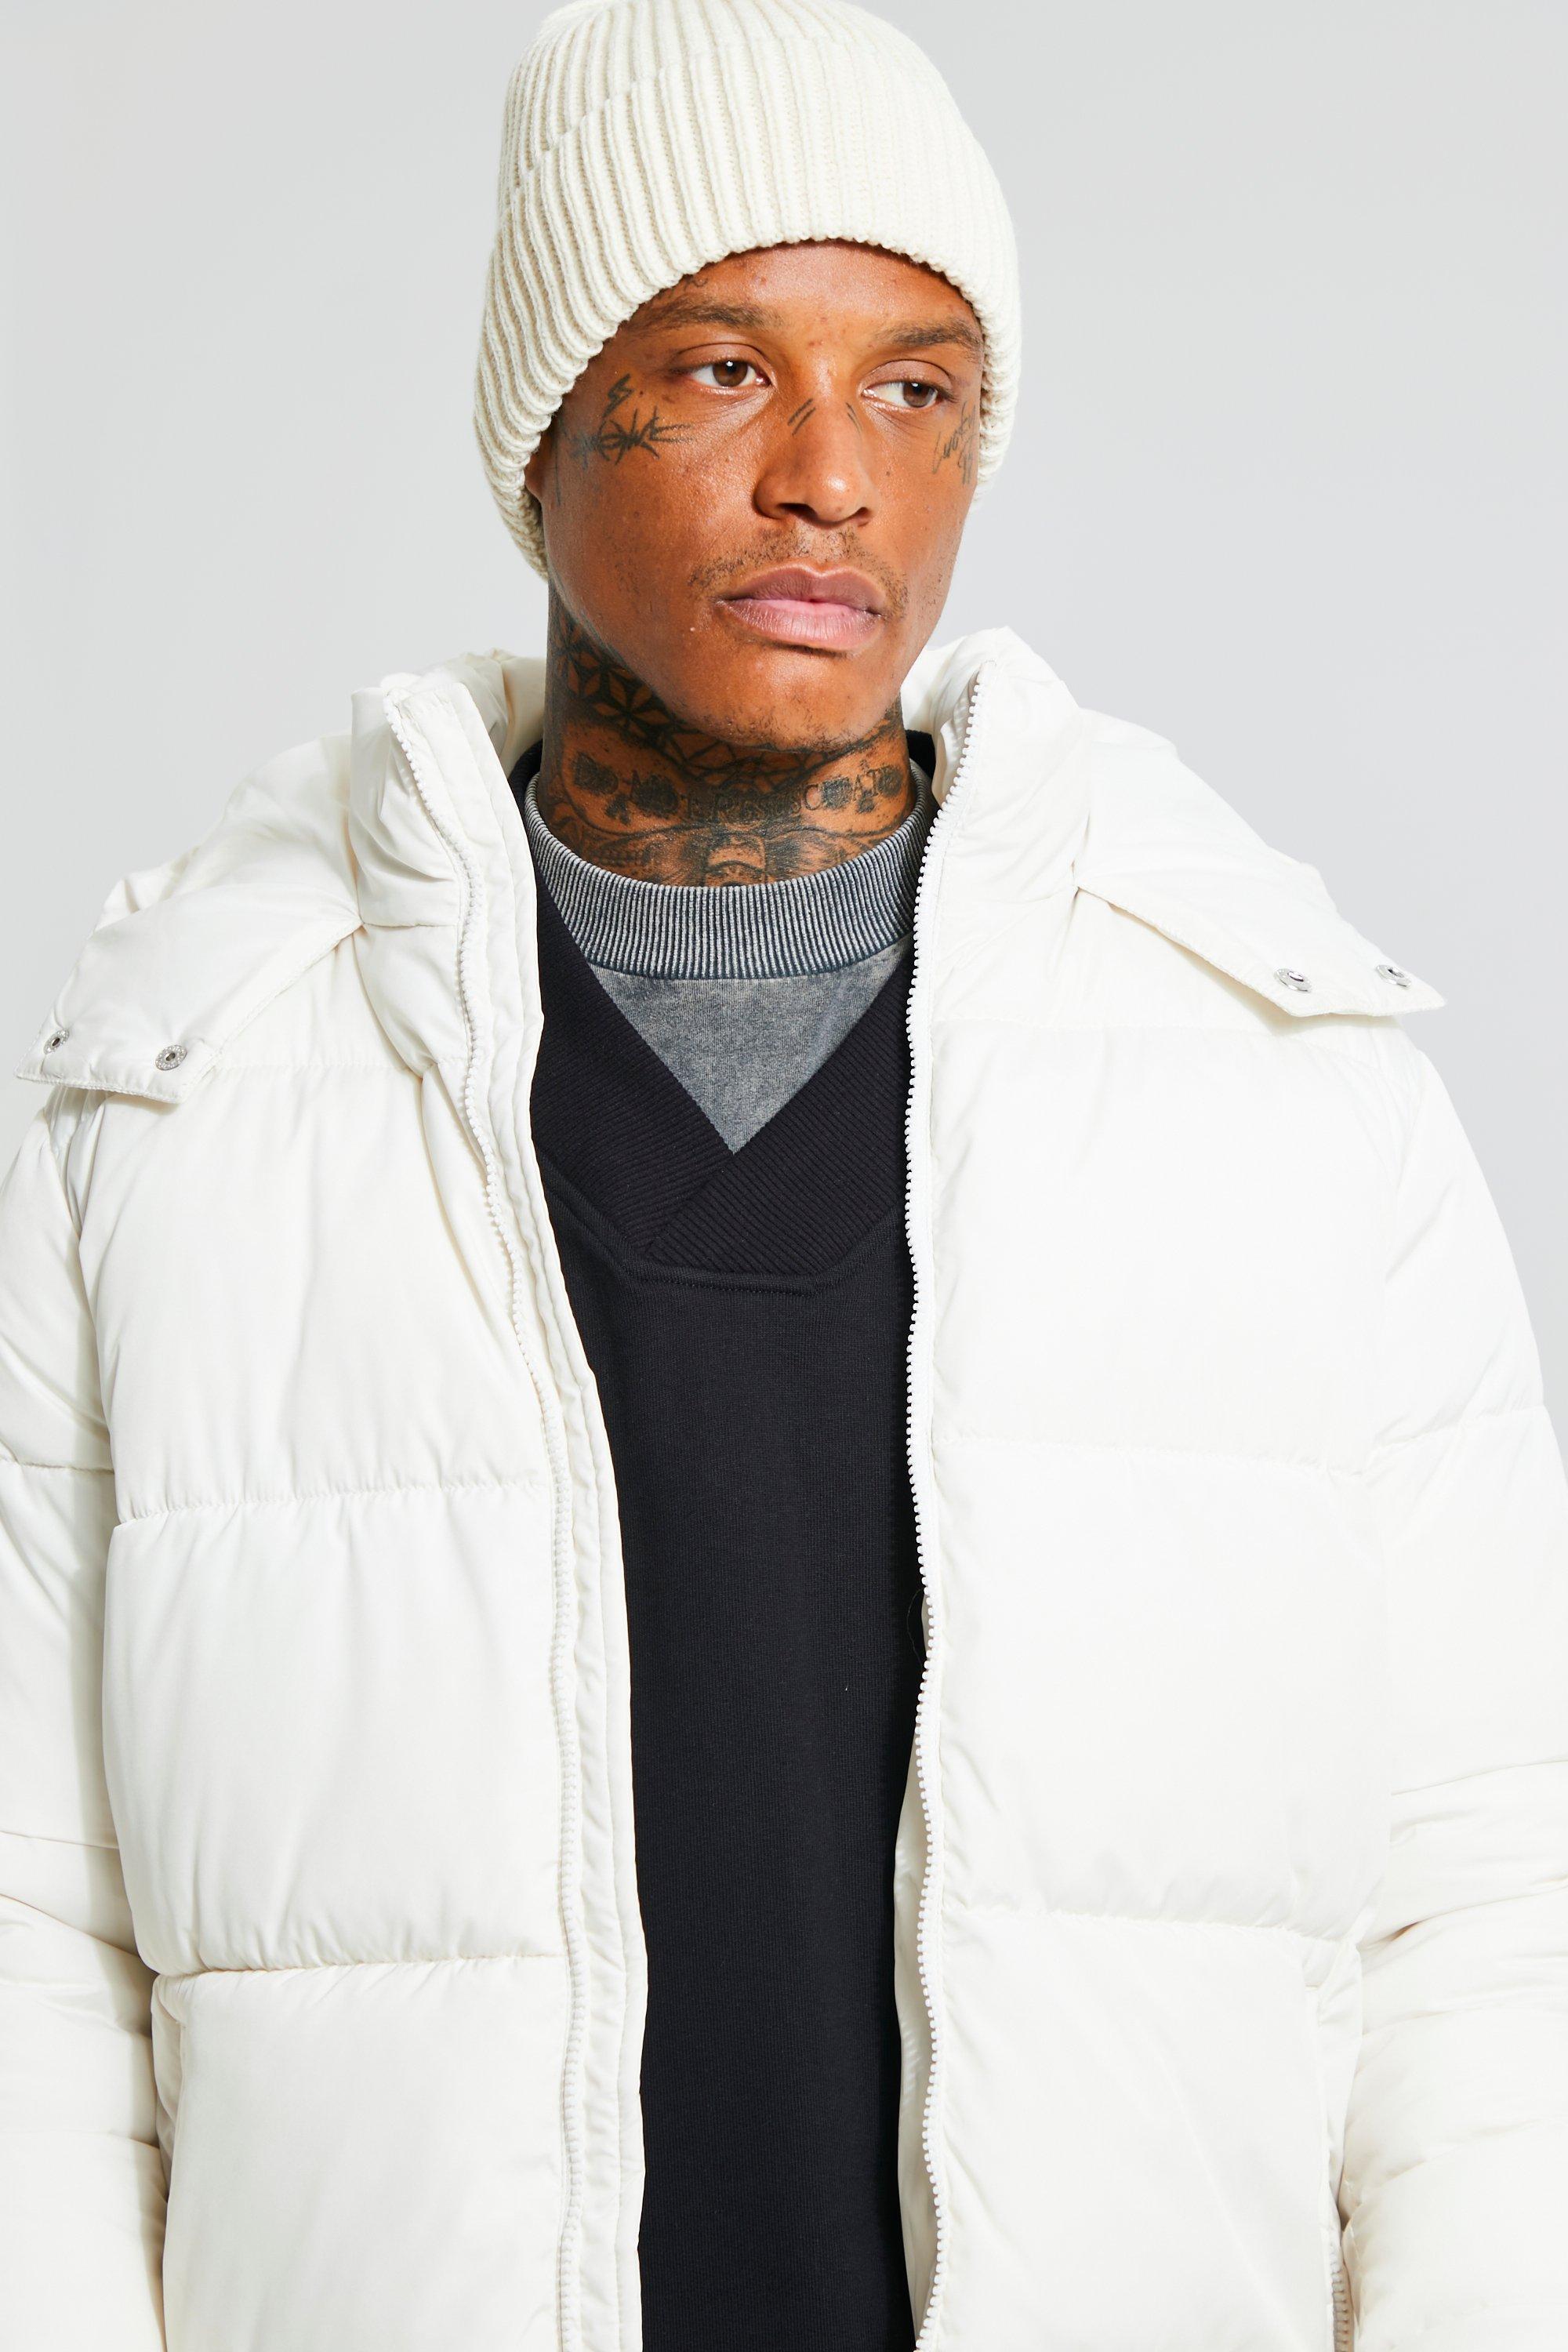 MenStyleWith Puffer Jacket - White EU 50 / US 40